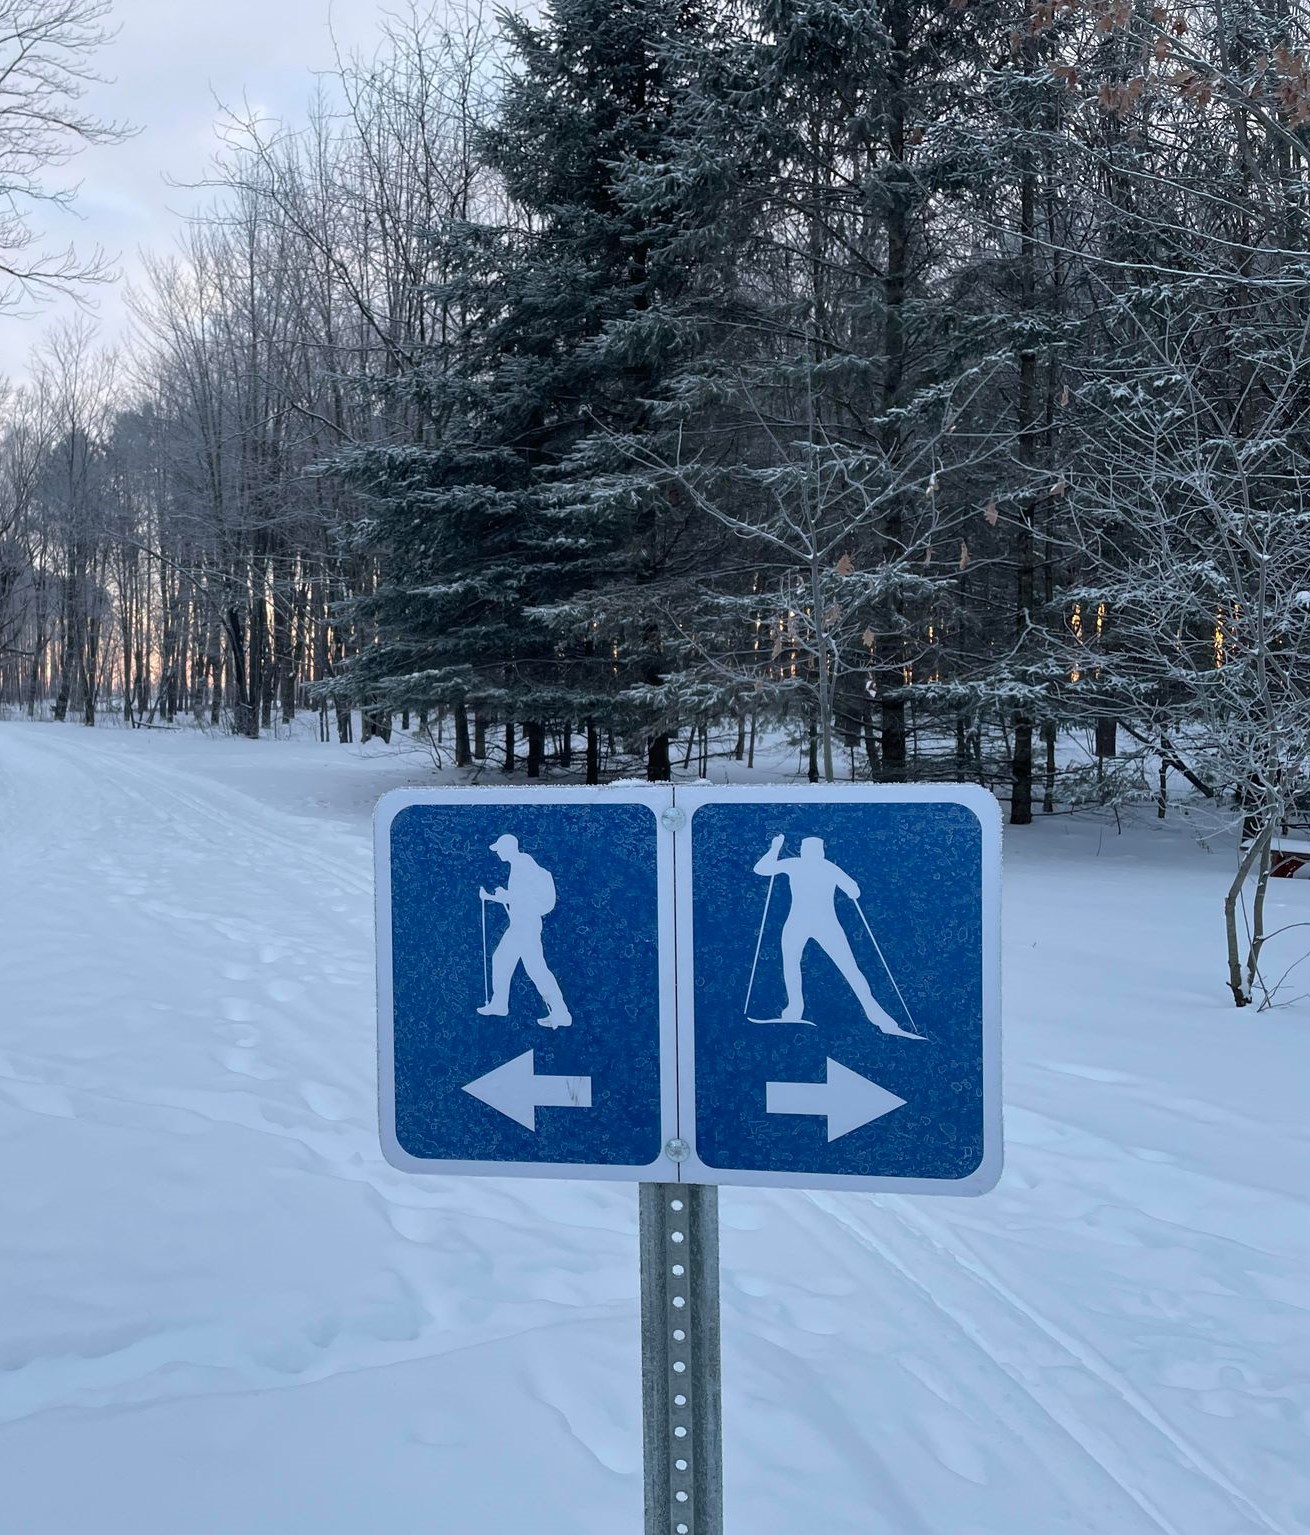 Signs on trail indicating hiking on the left and cross-country skiing on the right